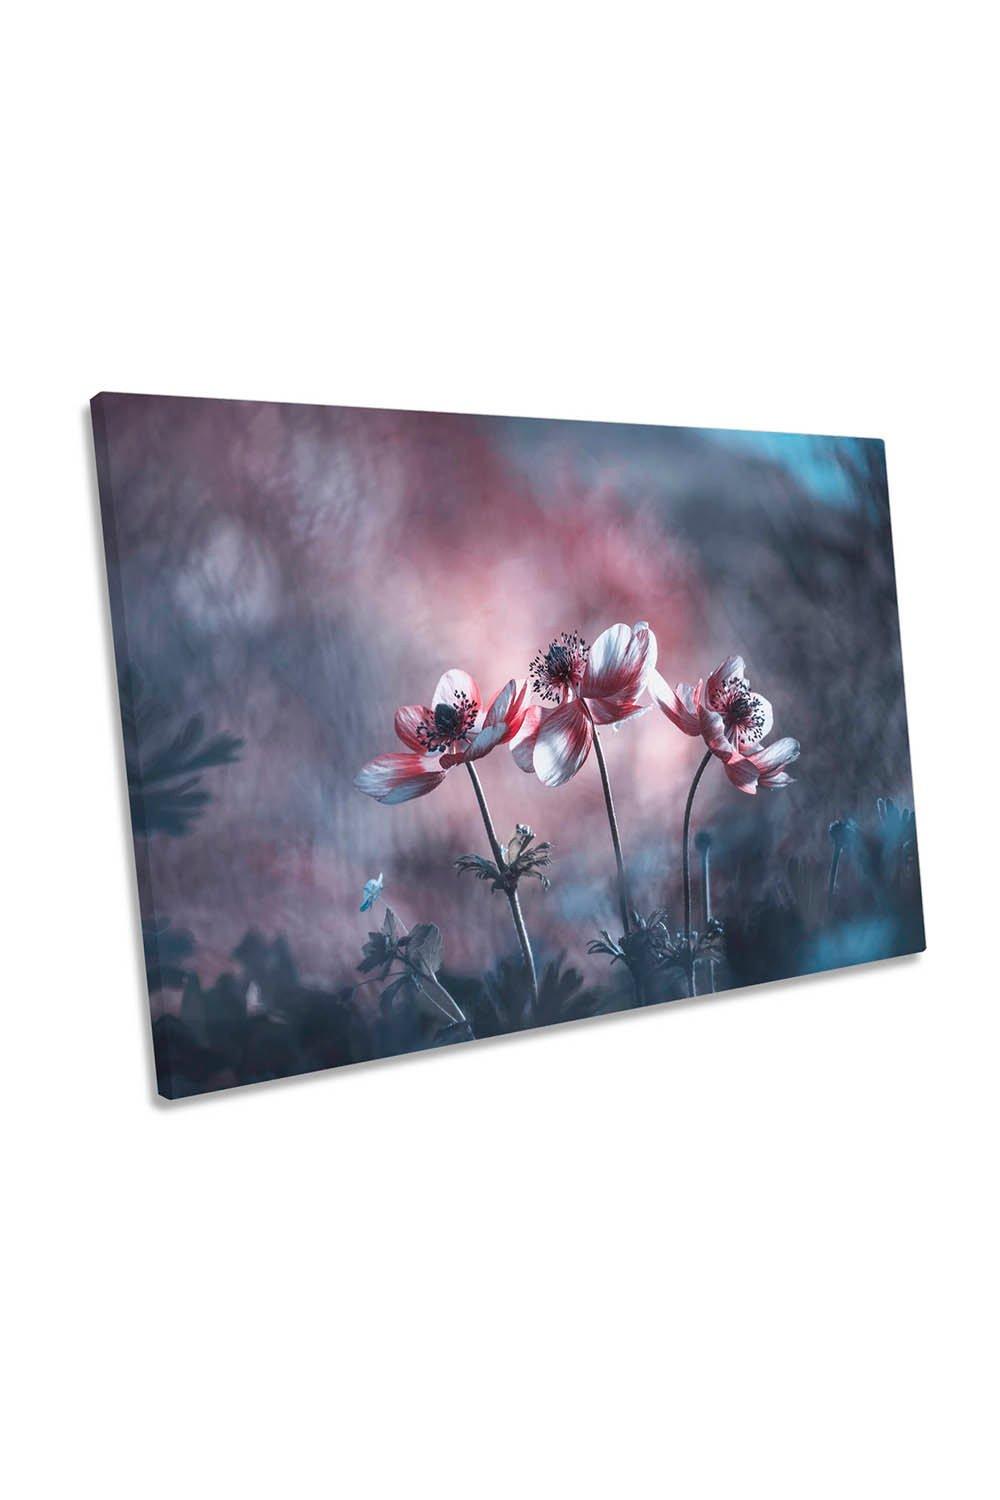 Ballerines Blossom Flowers Floral Garden Pink Canvas Wall Art Picture Print